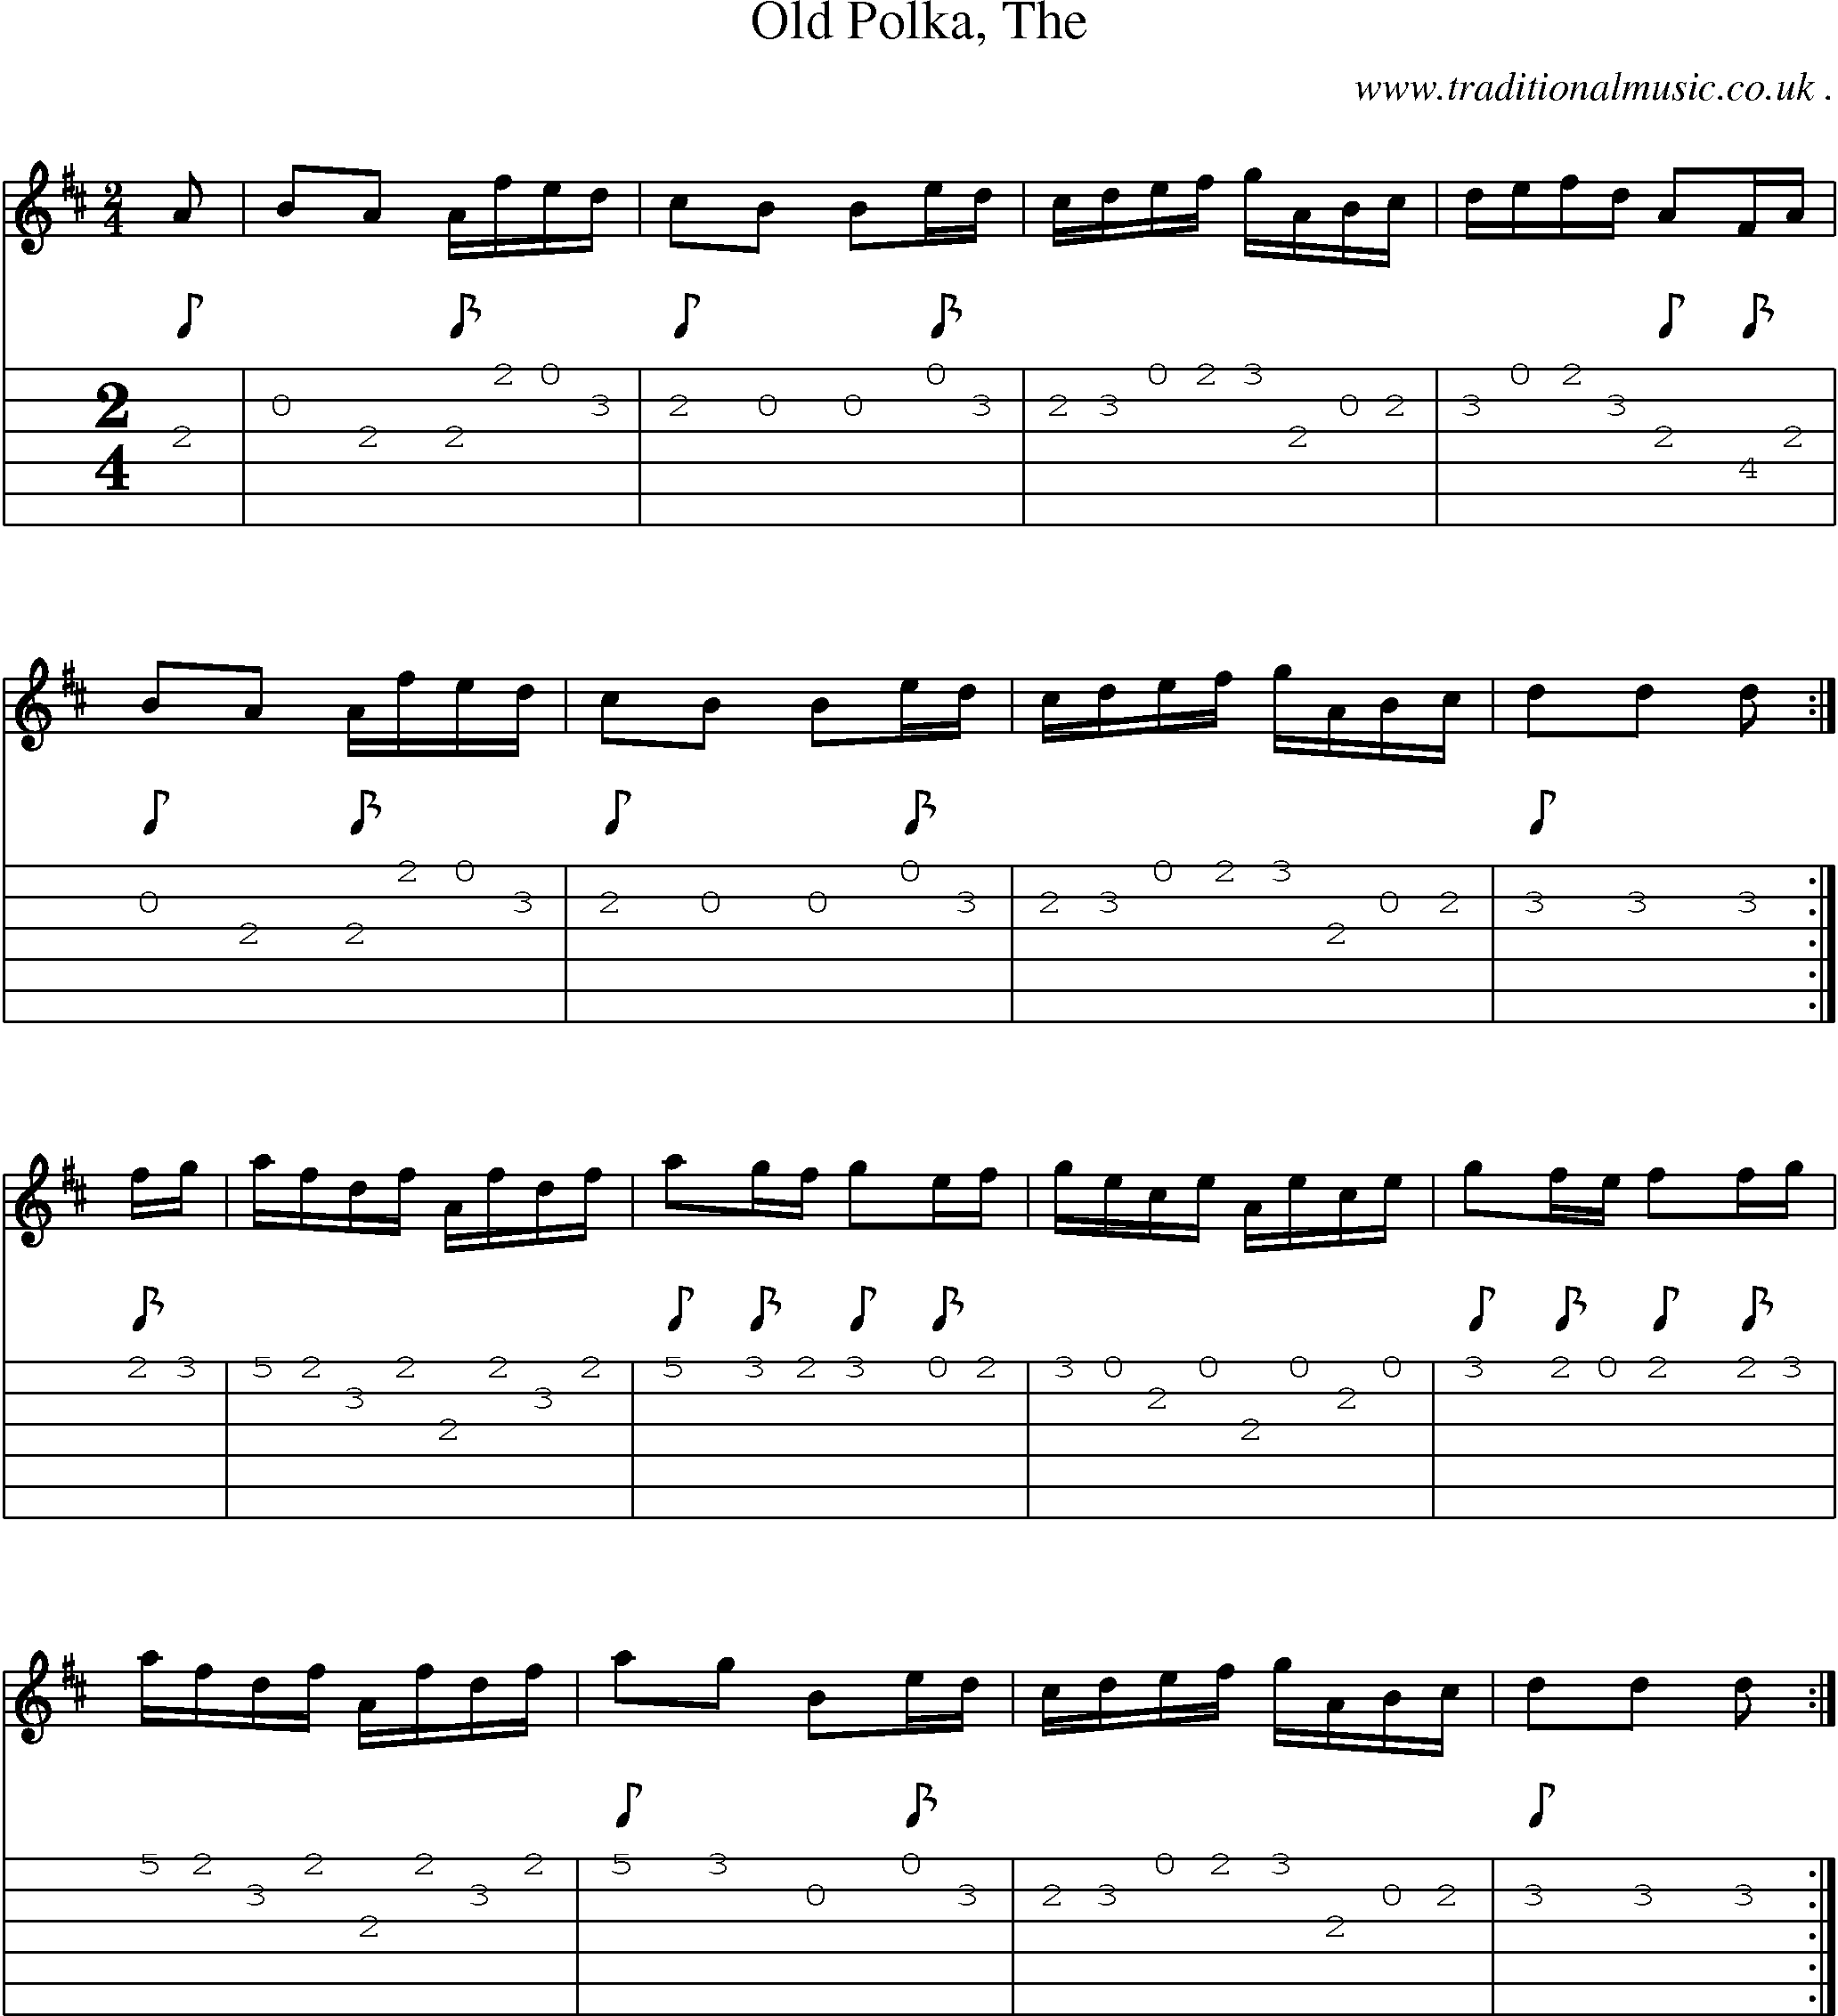 Sheet-music  score, Chords and Guitar Tabs for Old Polka The